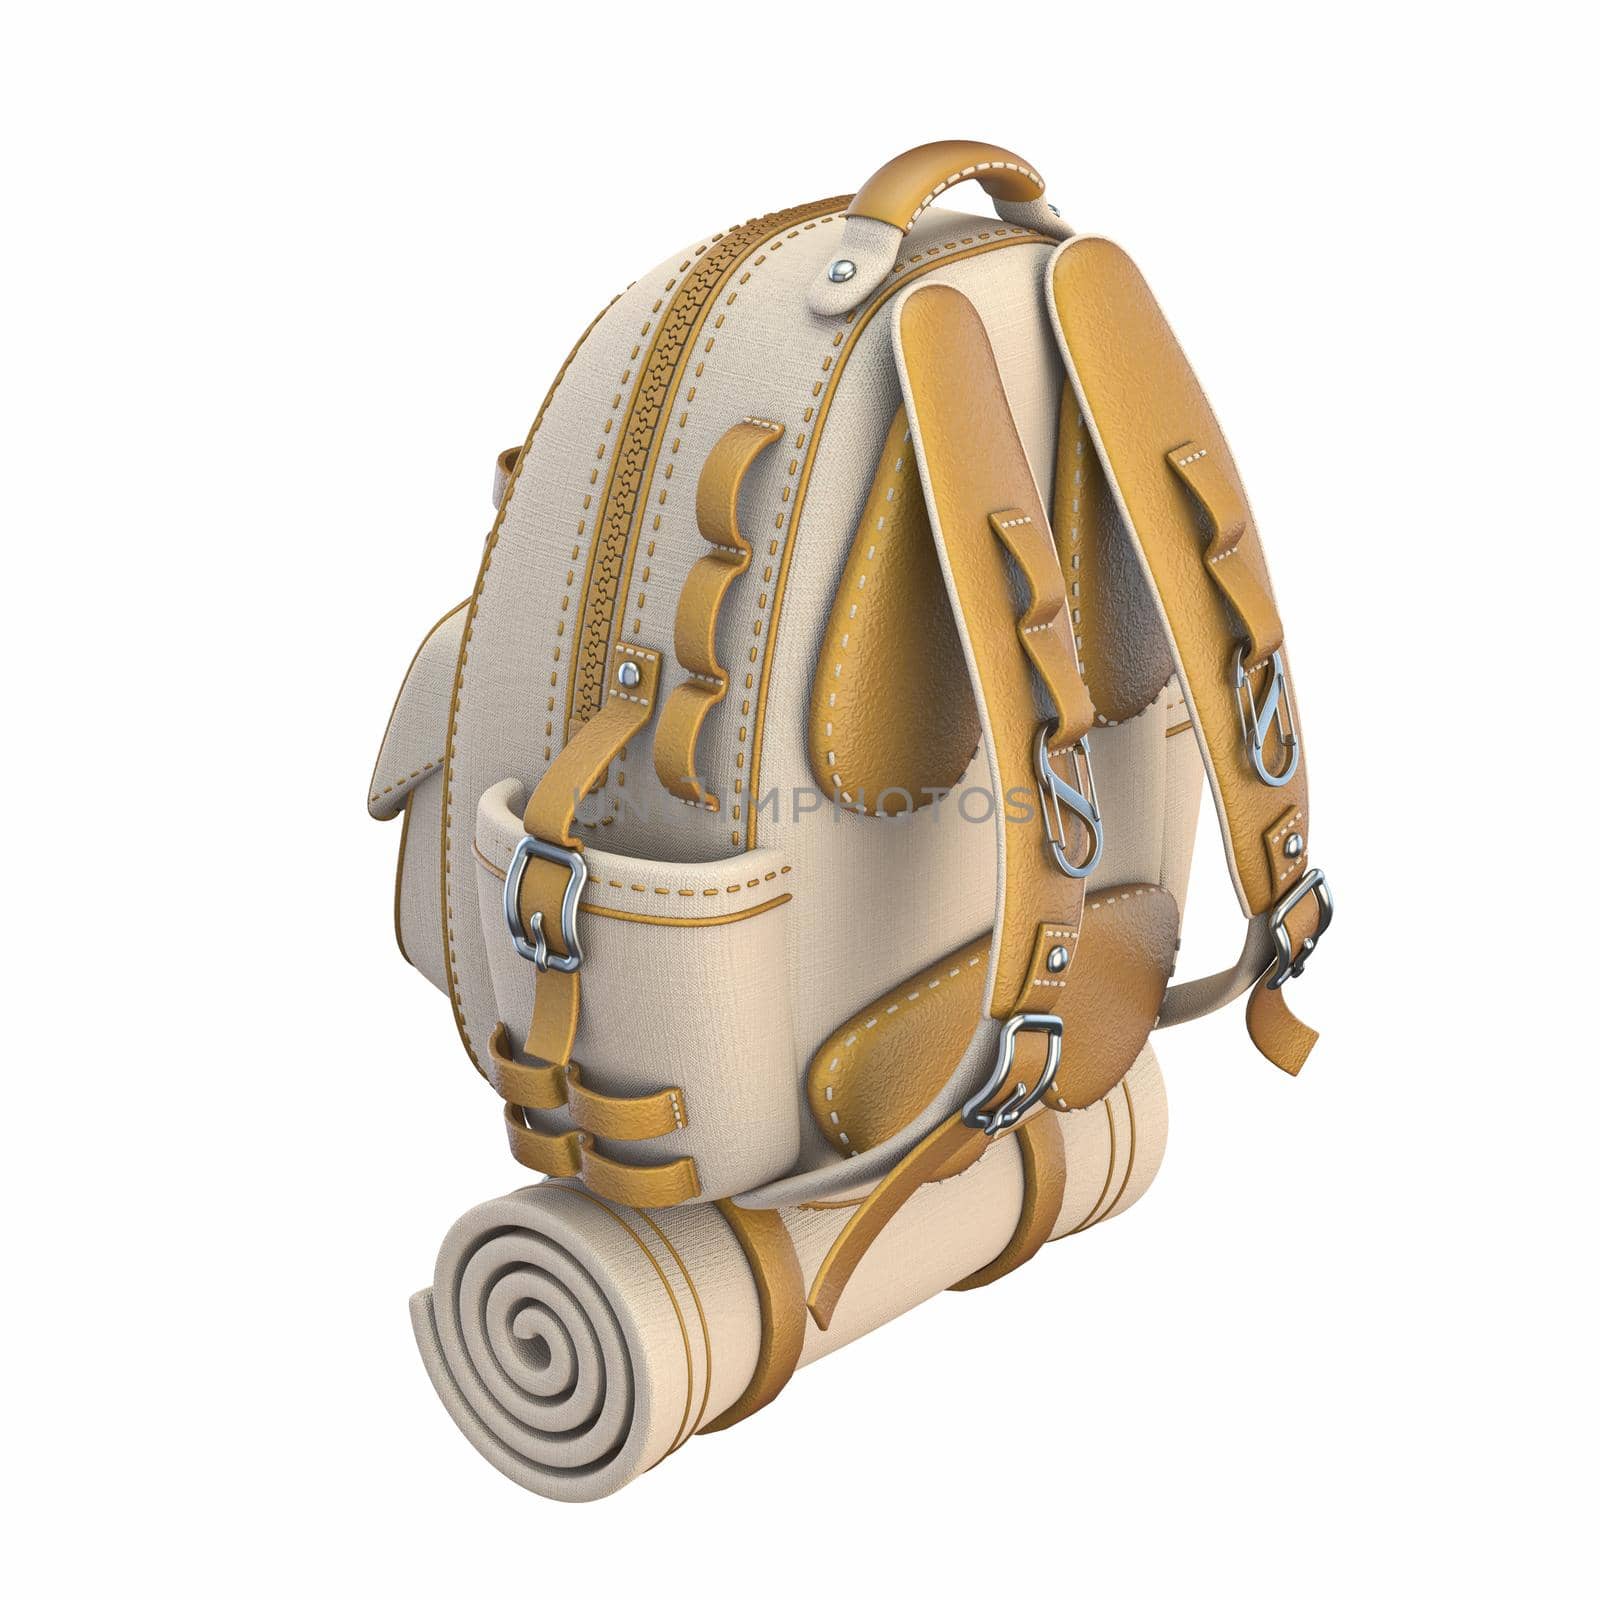 Canvas and leather backpack Back side view 3D render illustration isolated on white background